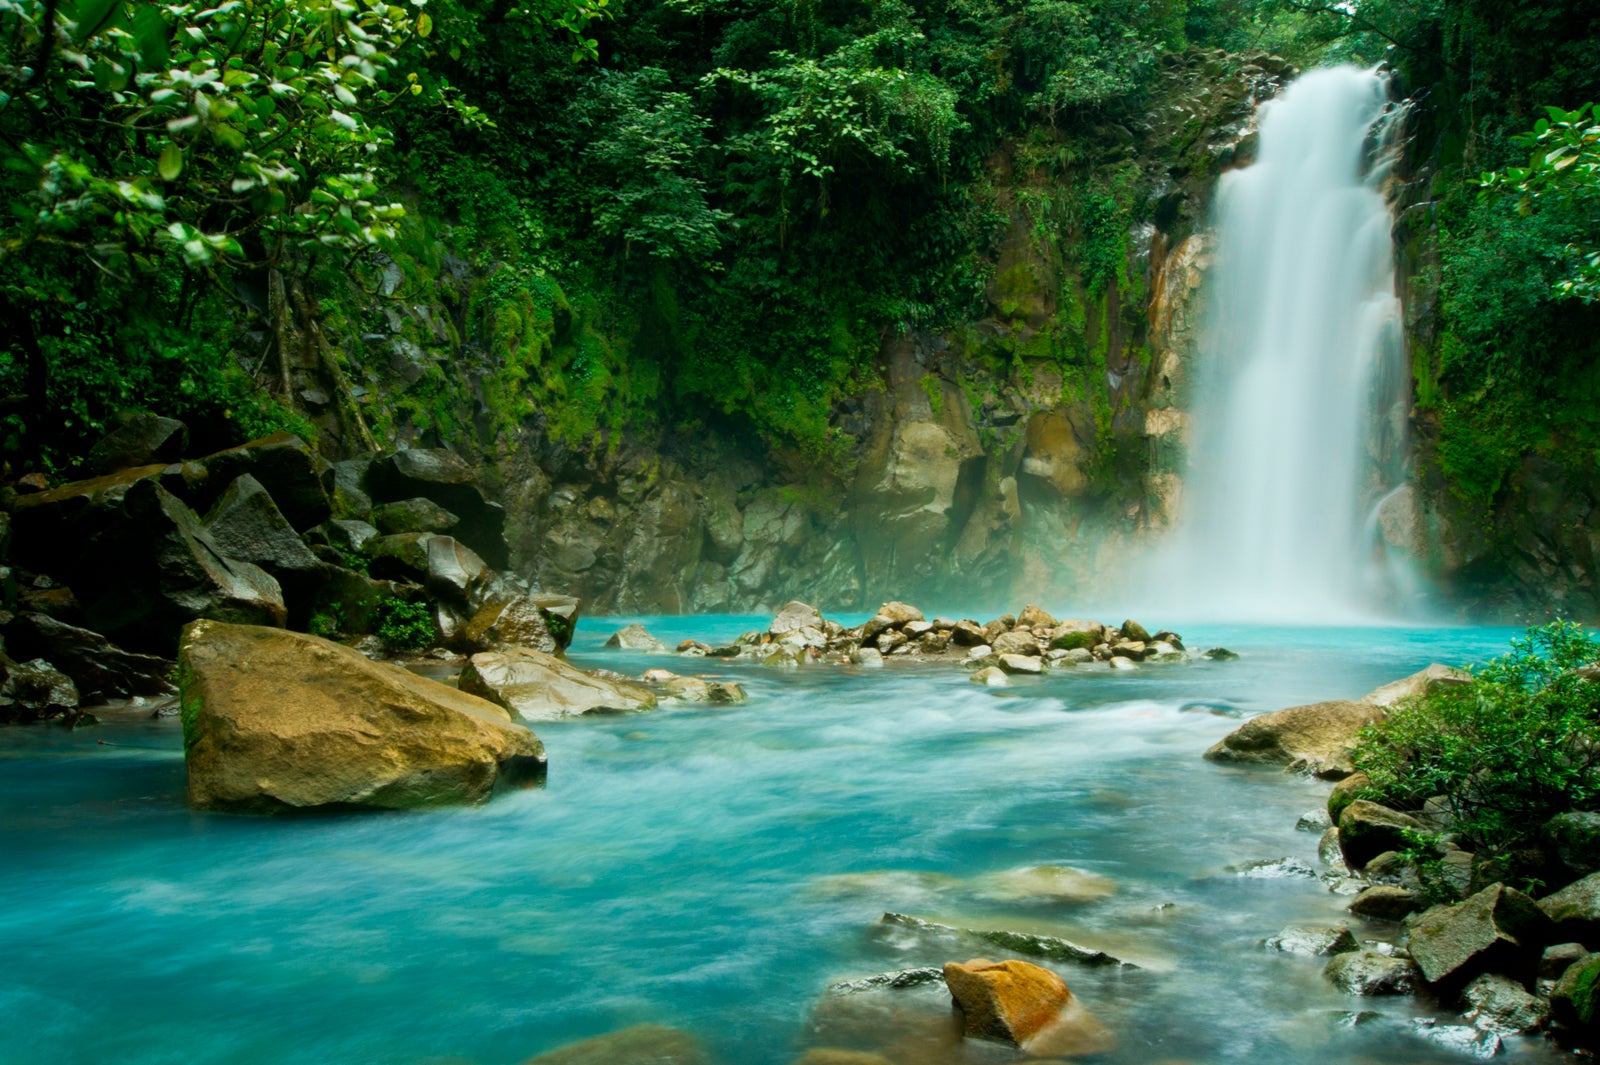 Deal Alert: US Cities to Costa Rica From $230 Round-Trip